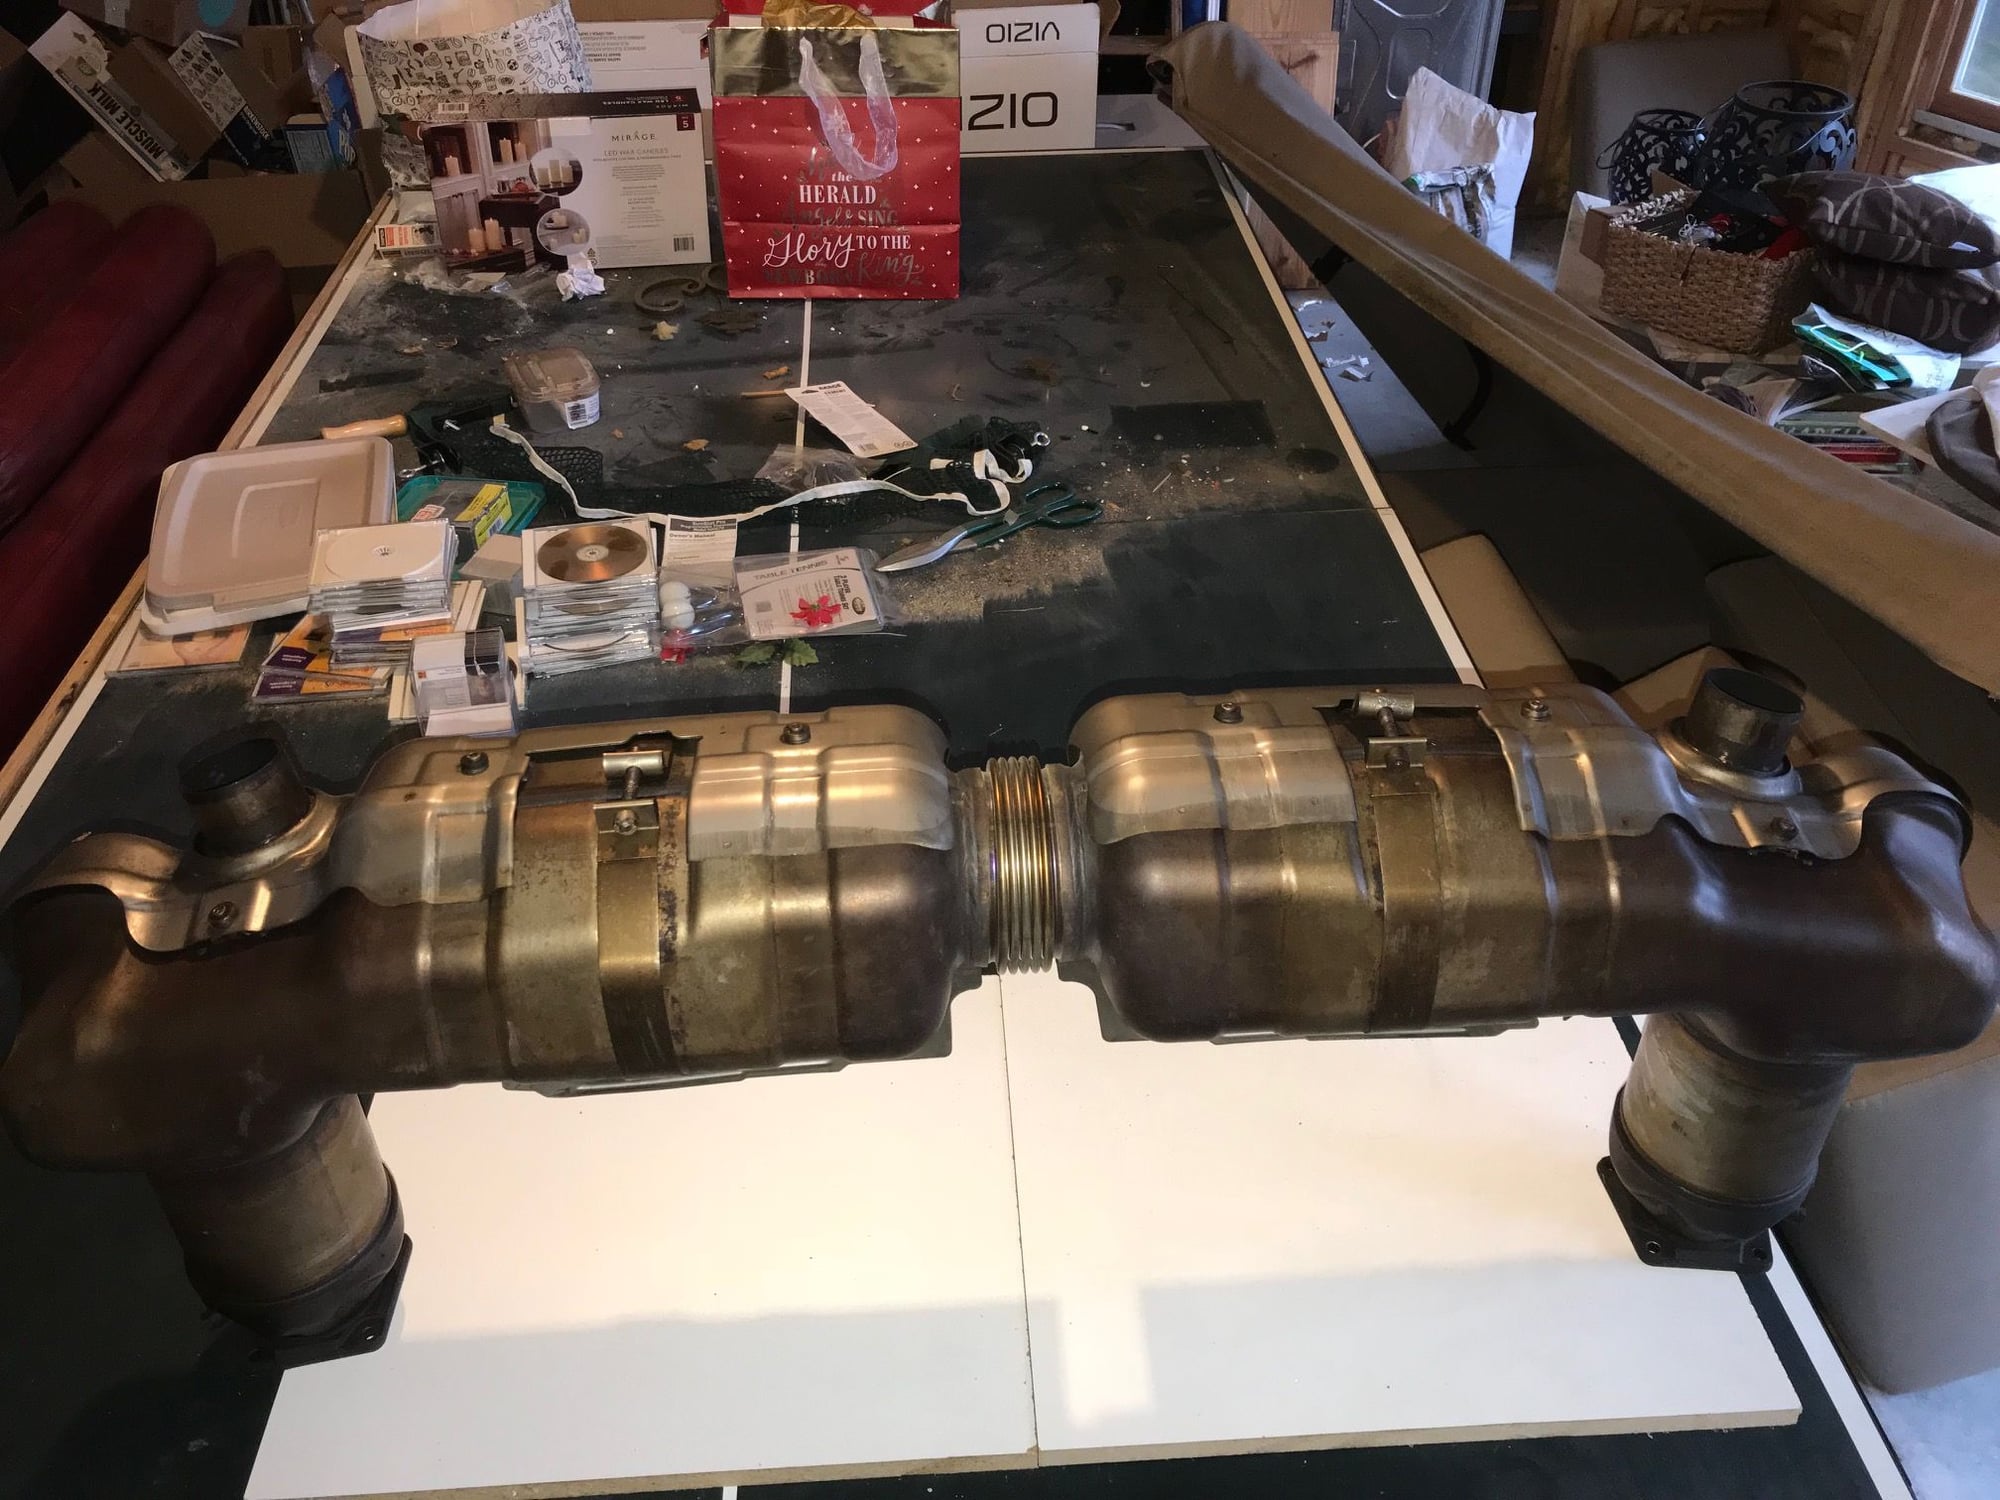 Engine - Exhaust - FS Porsche 997.1 Turbo OEM Exhaust with 17K miles - Used - 2007 to 2008 Porsche 911 - Dacula, GA 30019, United States